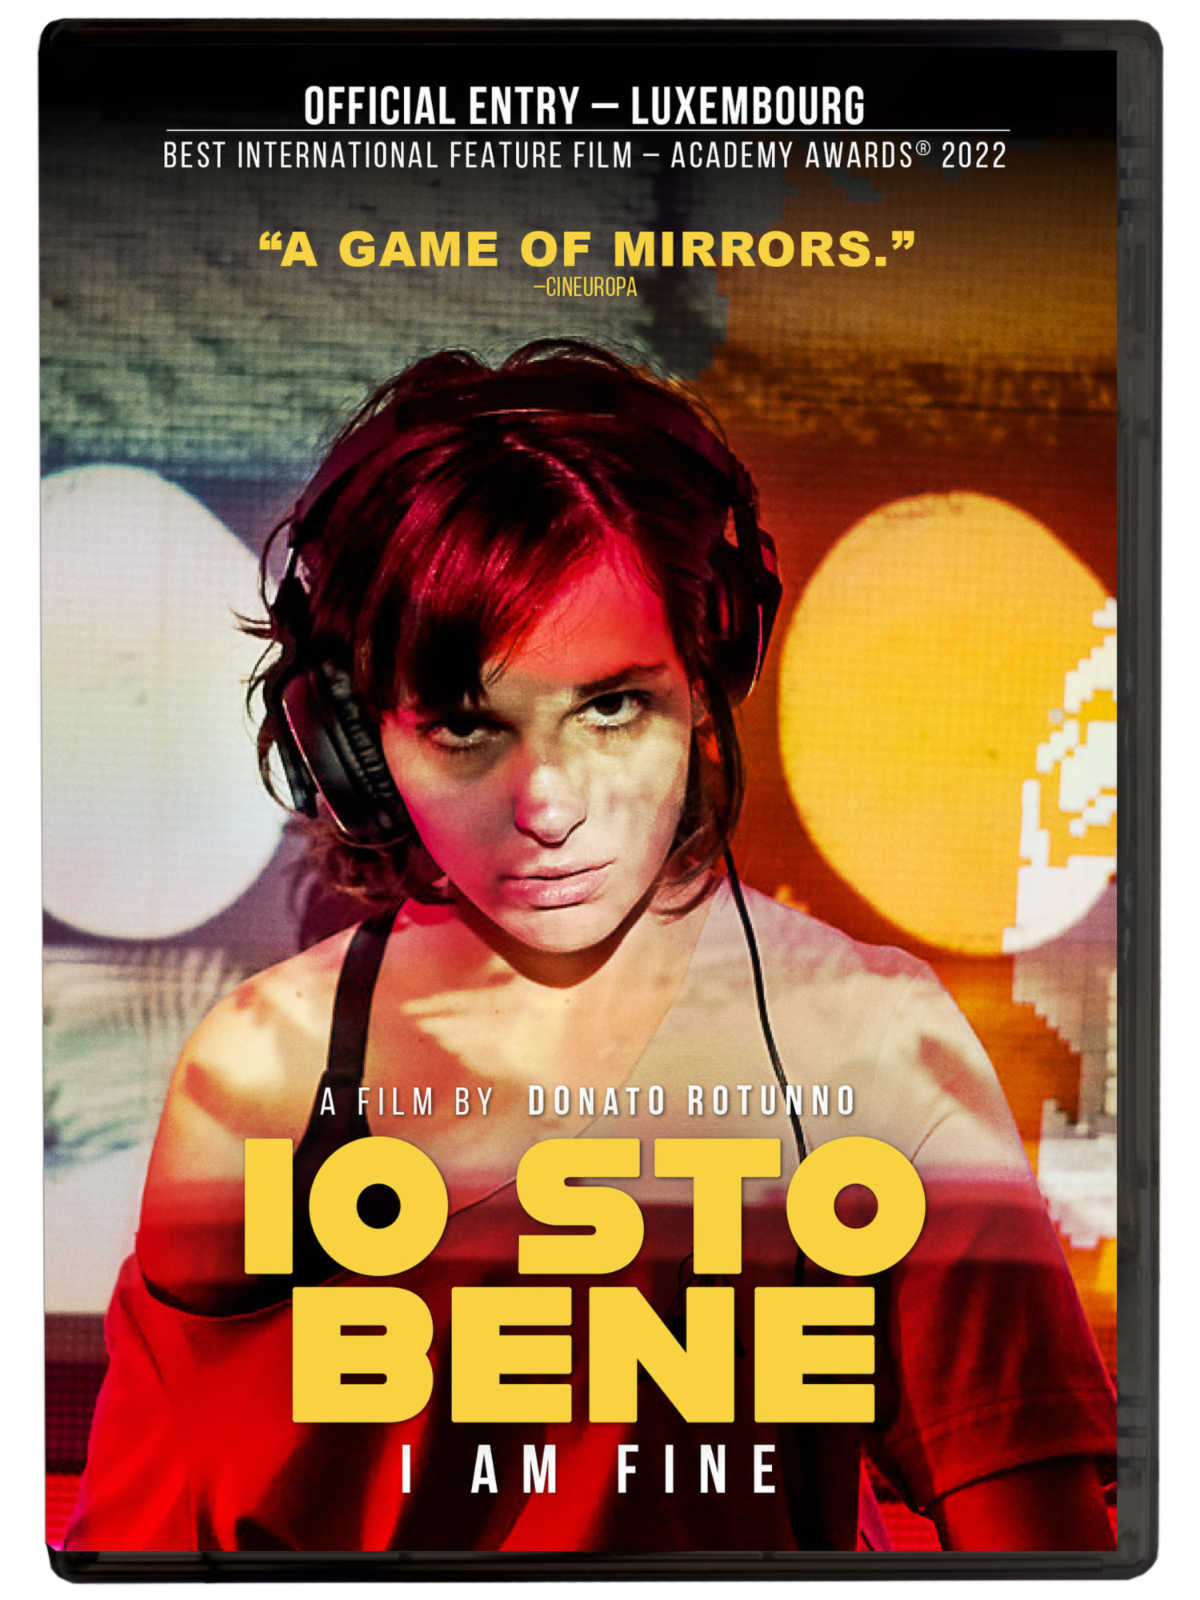 Io Sto Bene, meaning "I am fine" in Italian, is a poignant drama about the complex and often contradictory experiences of immigrants. Set in Luxembourg, the film tells the story of  Italian immigrants who are struggling to come to terms with their past and their present.